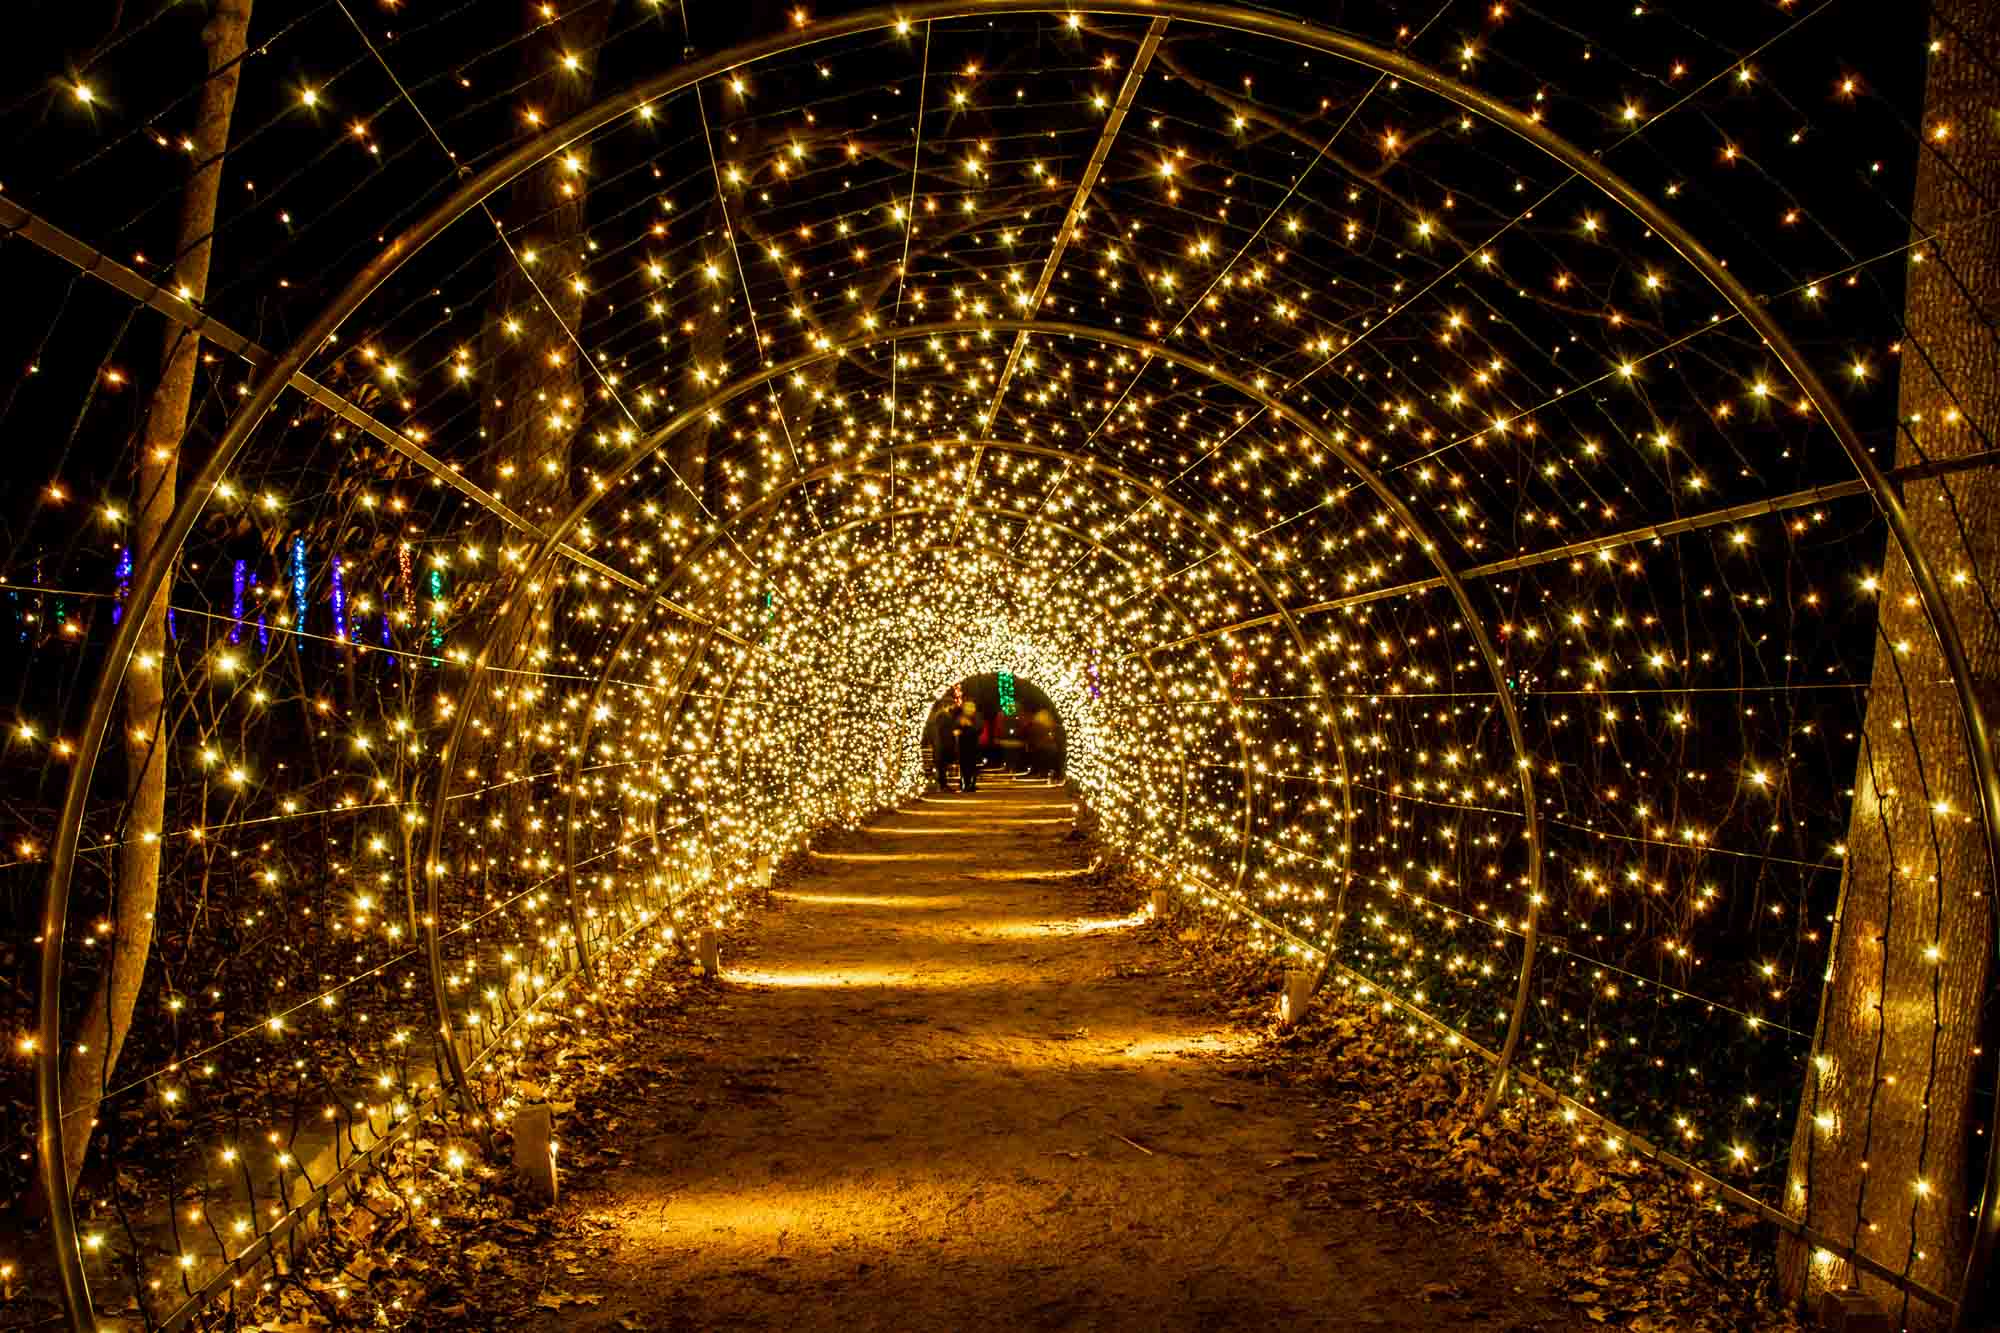 Tunnel made of white lights